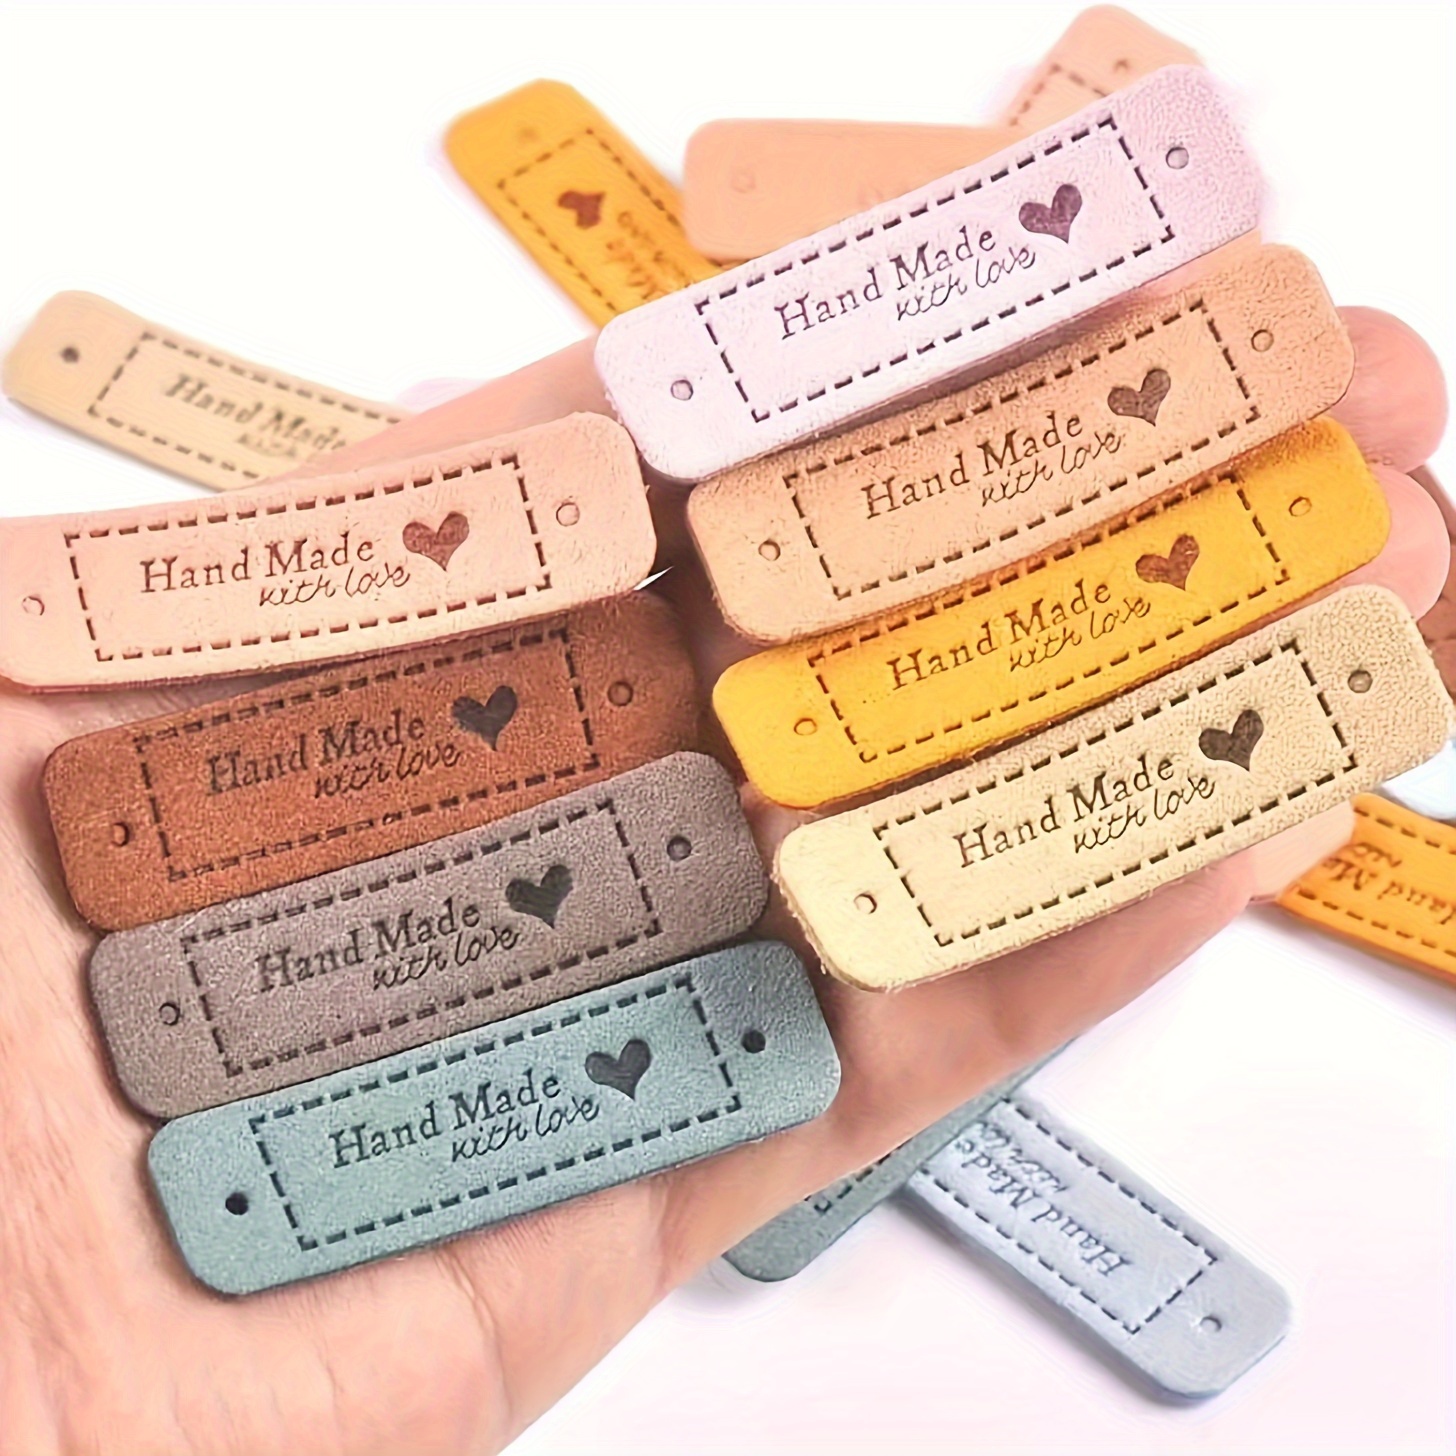  60 Pcs Handmade Leather Labels, Colorful Crochet Tags